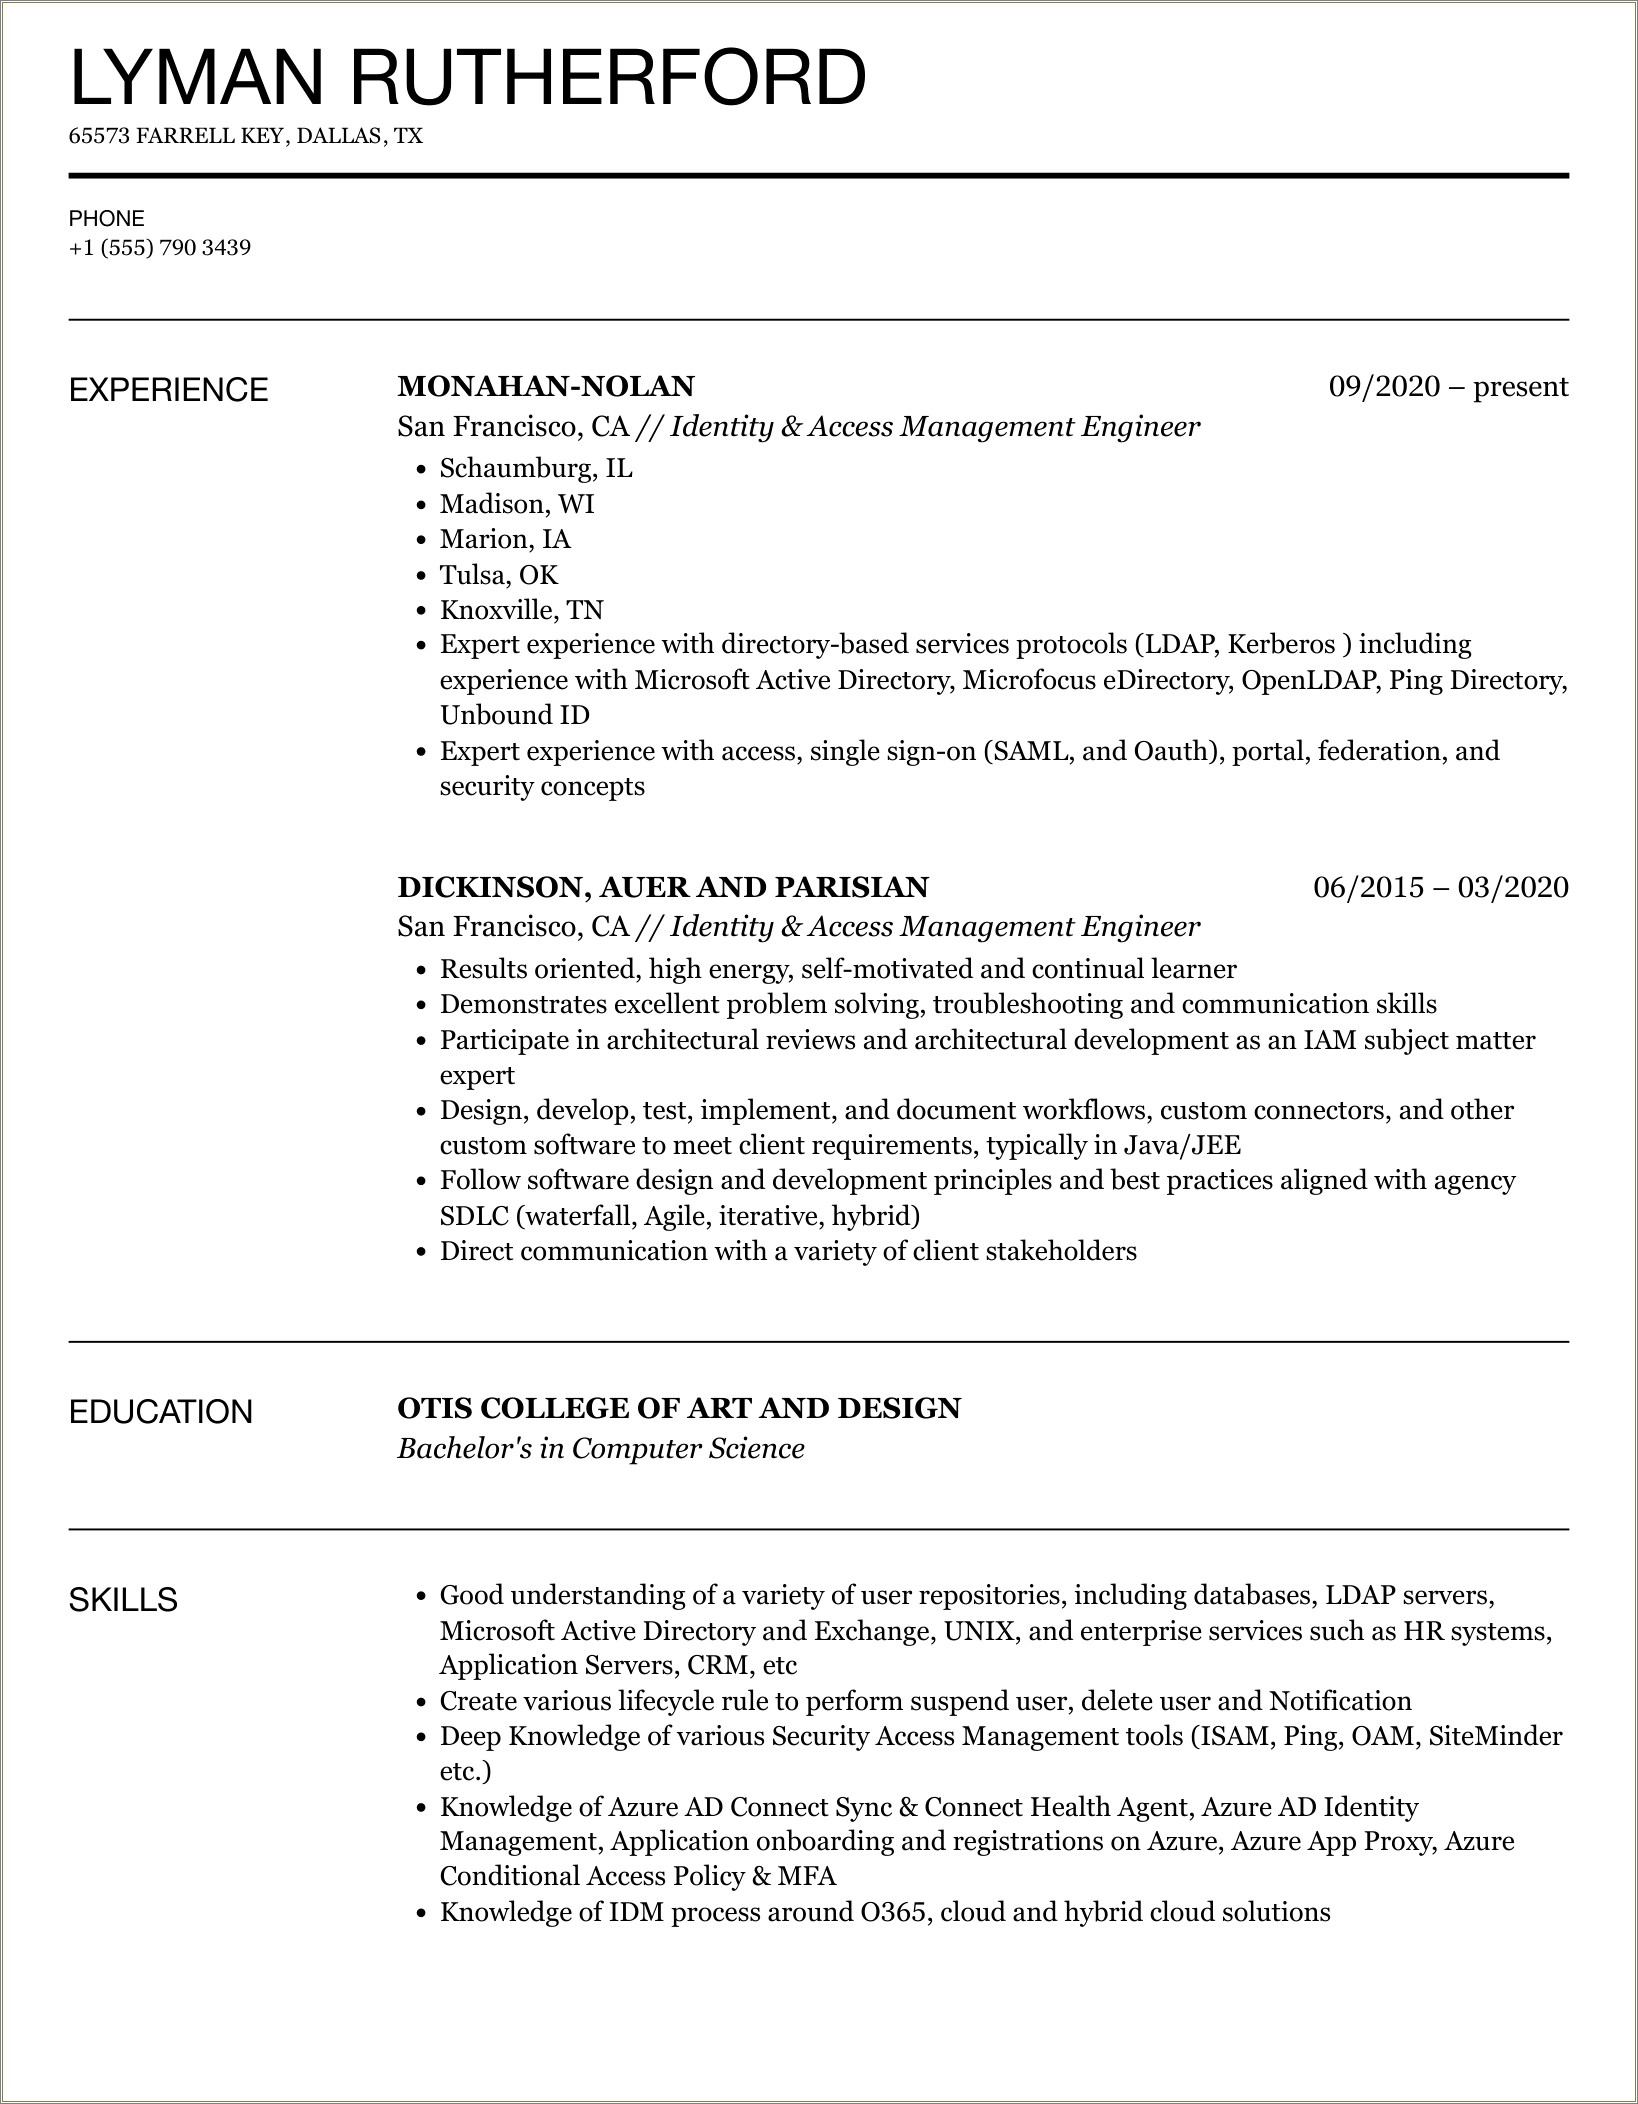 Identity And Access Management Achievement In Resume